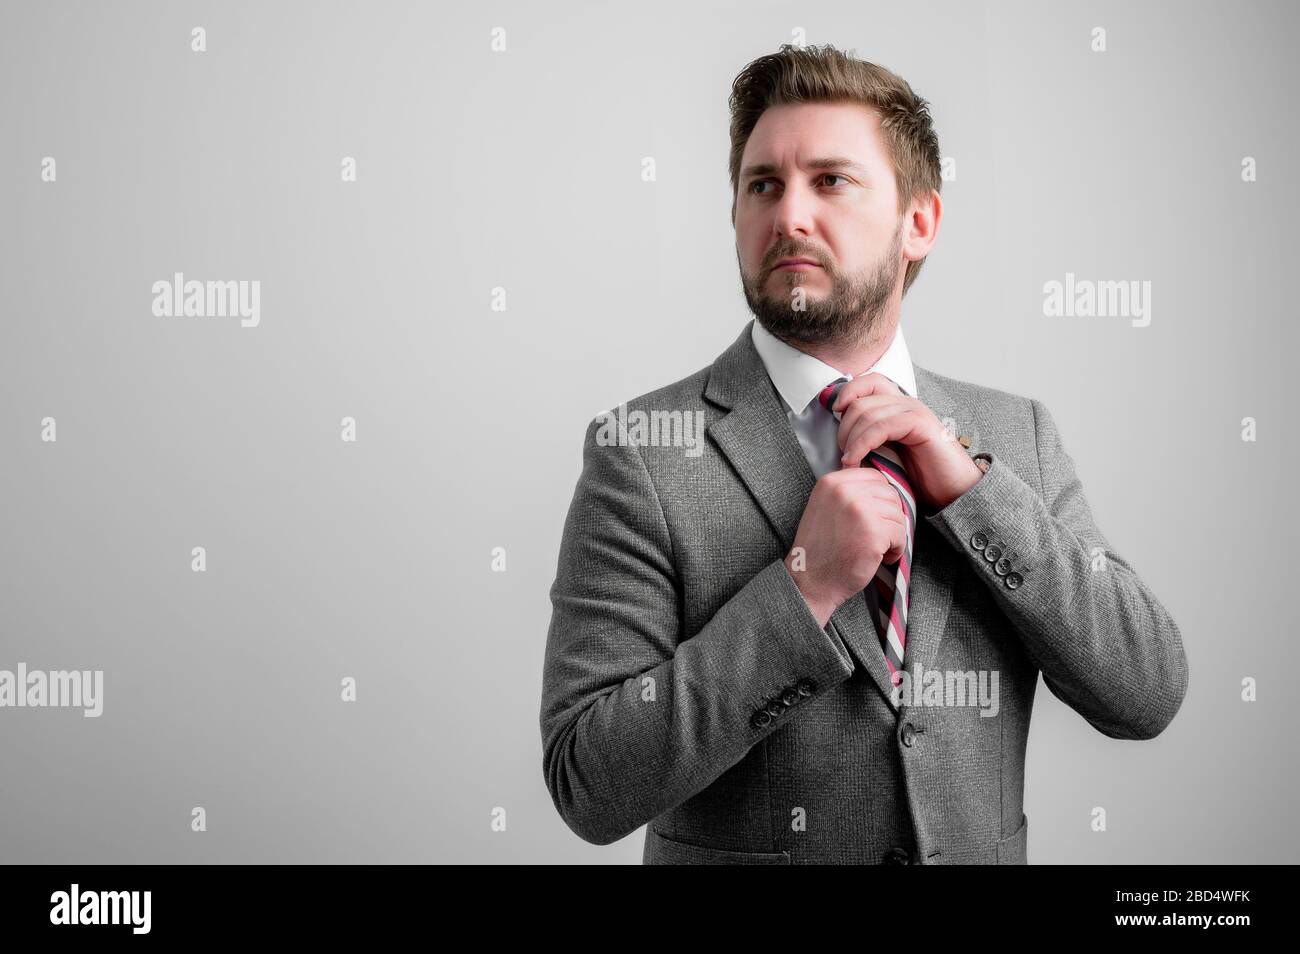 Portrait of business man arranging his tie isolated on grey background with copy space advertising area Stock Photo